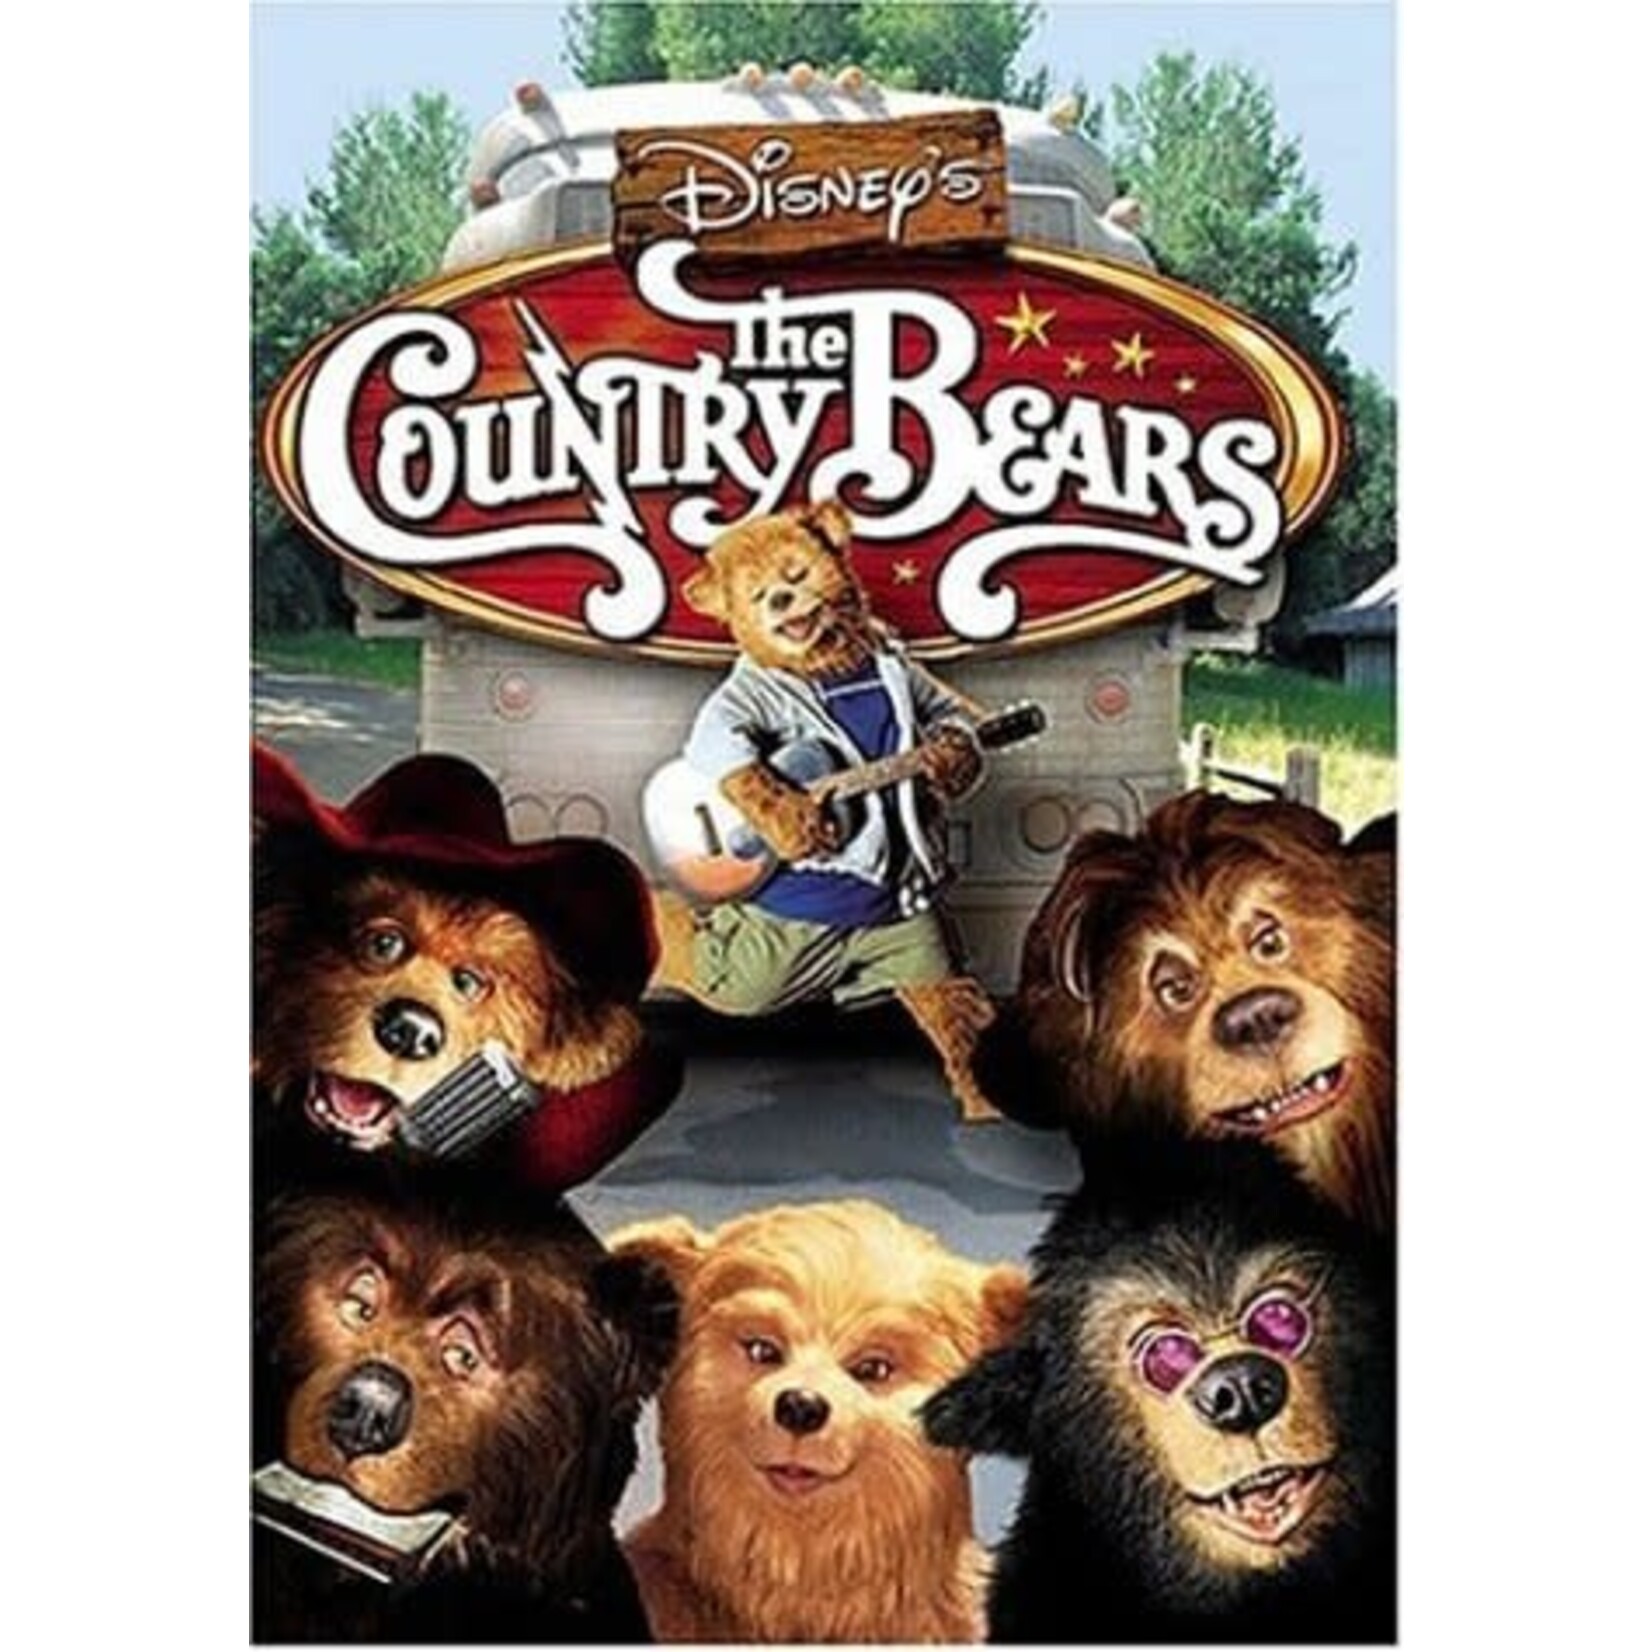 Country Bears (2002) [USED DVD]